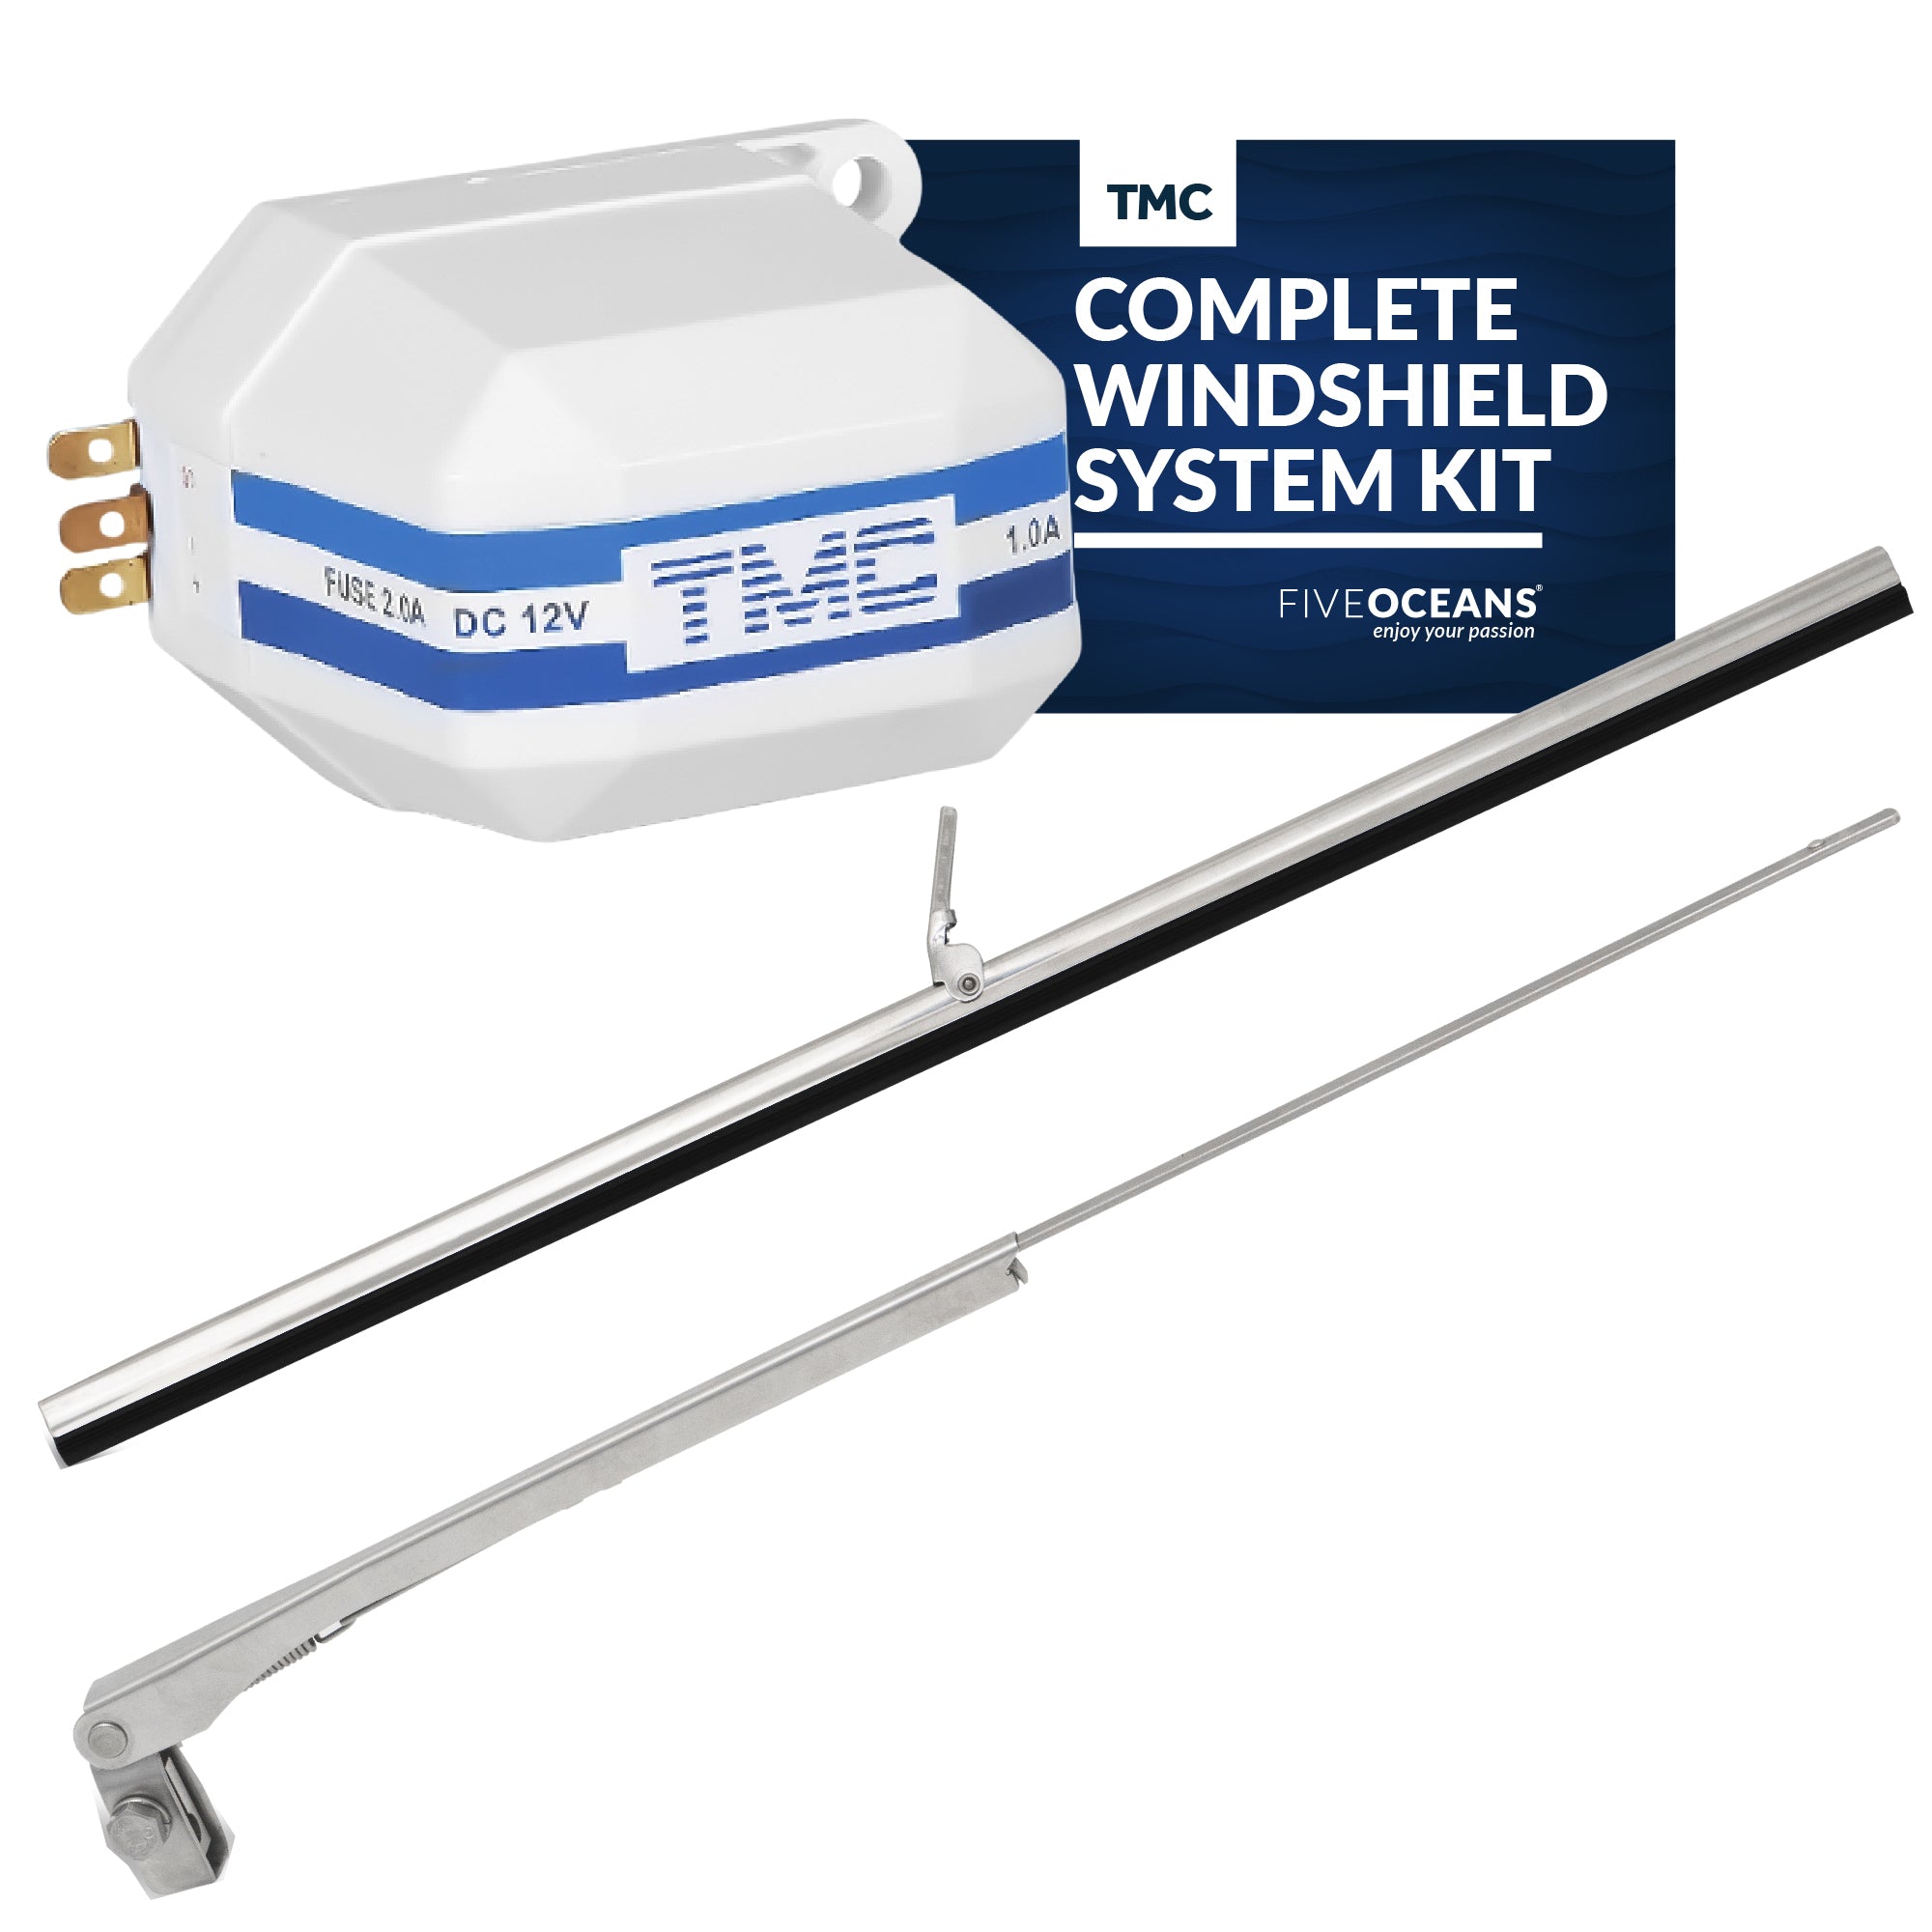 TMC Windshield Complete System Kit - FO745-C2